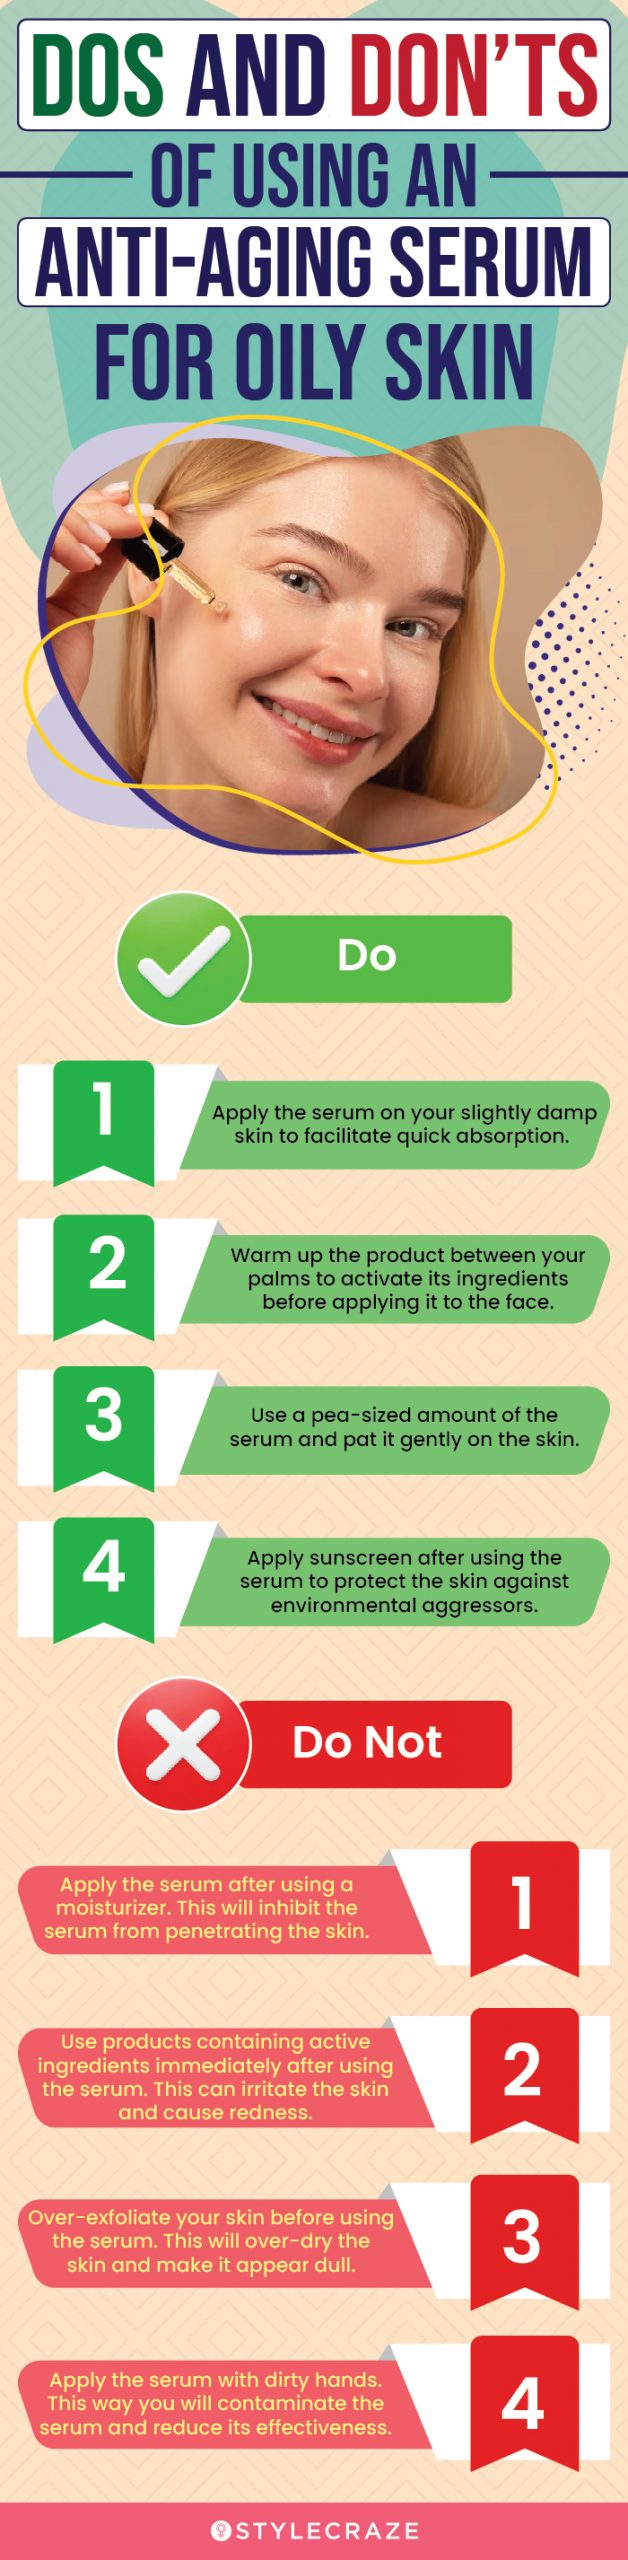 Dos And Don’ts Of Using An Anti-Aging Serum For Oily Skin (infographic)